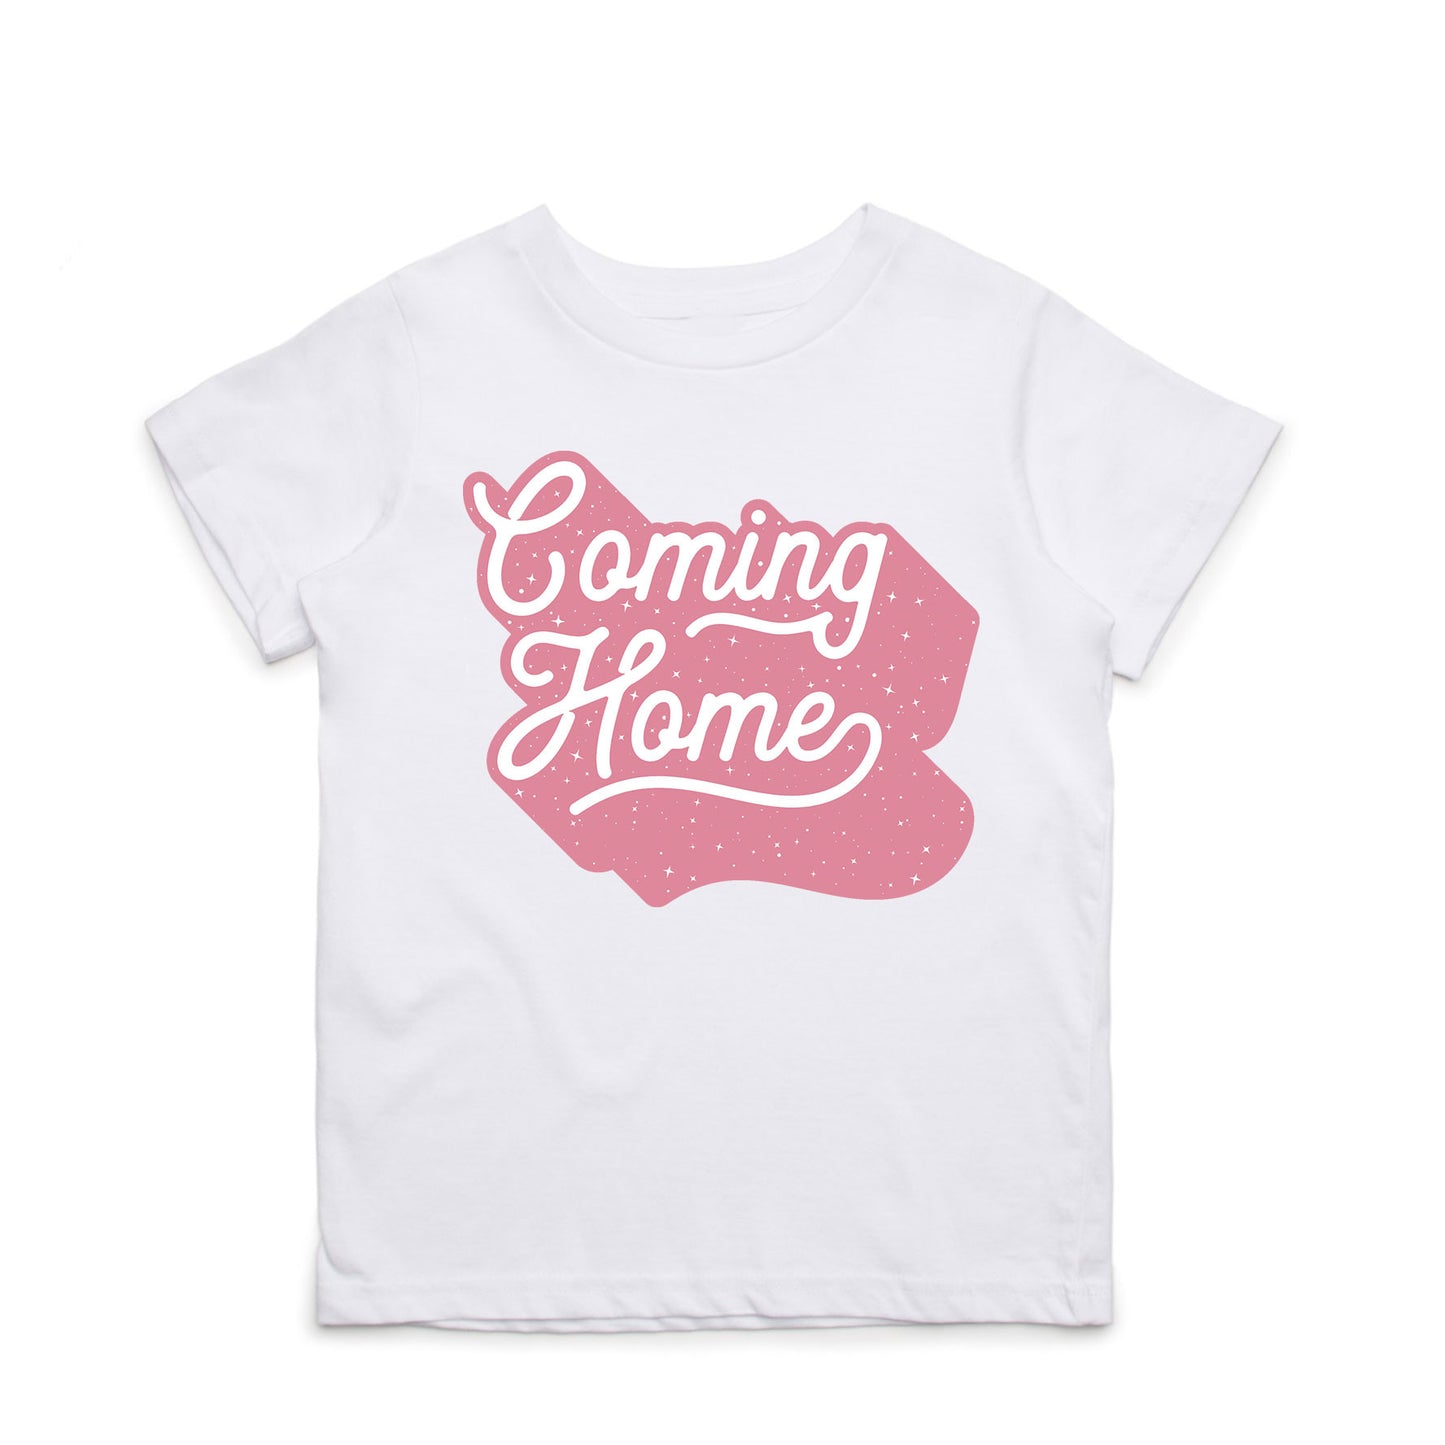 Coming Home - Youth Tee